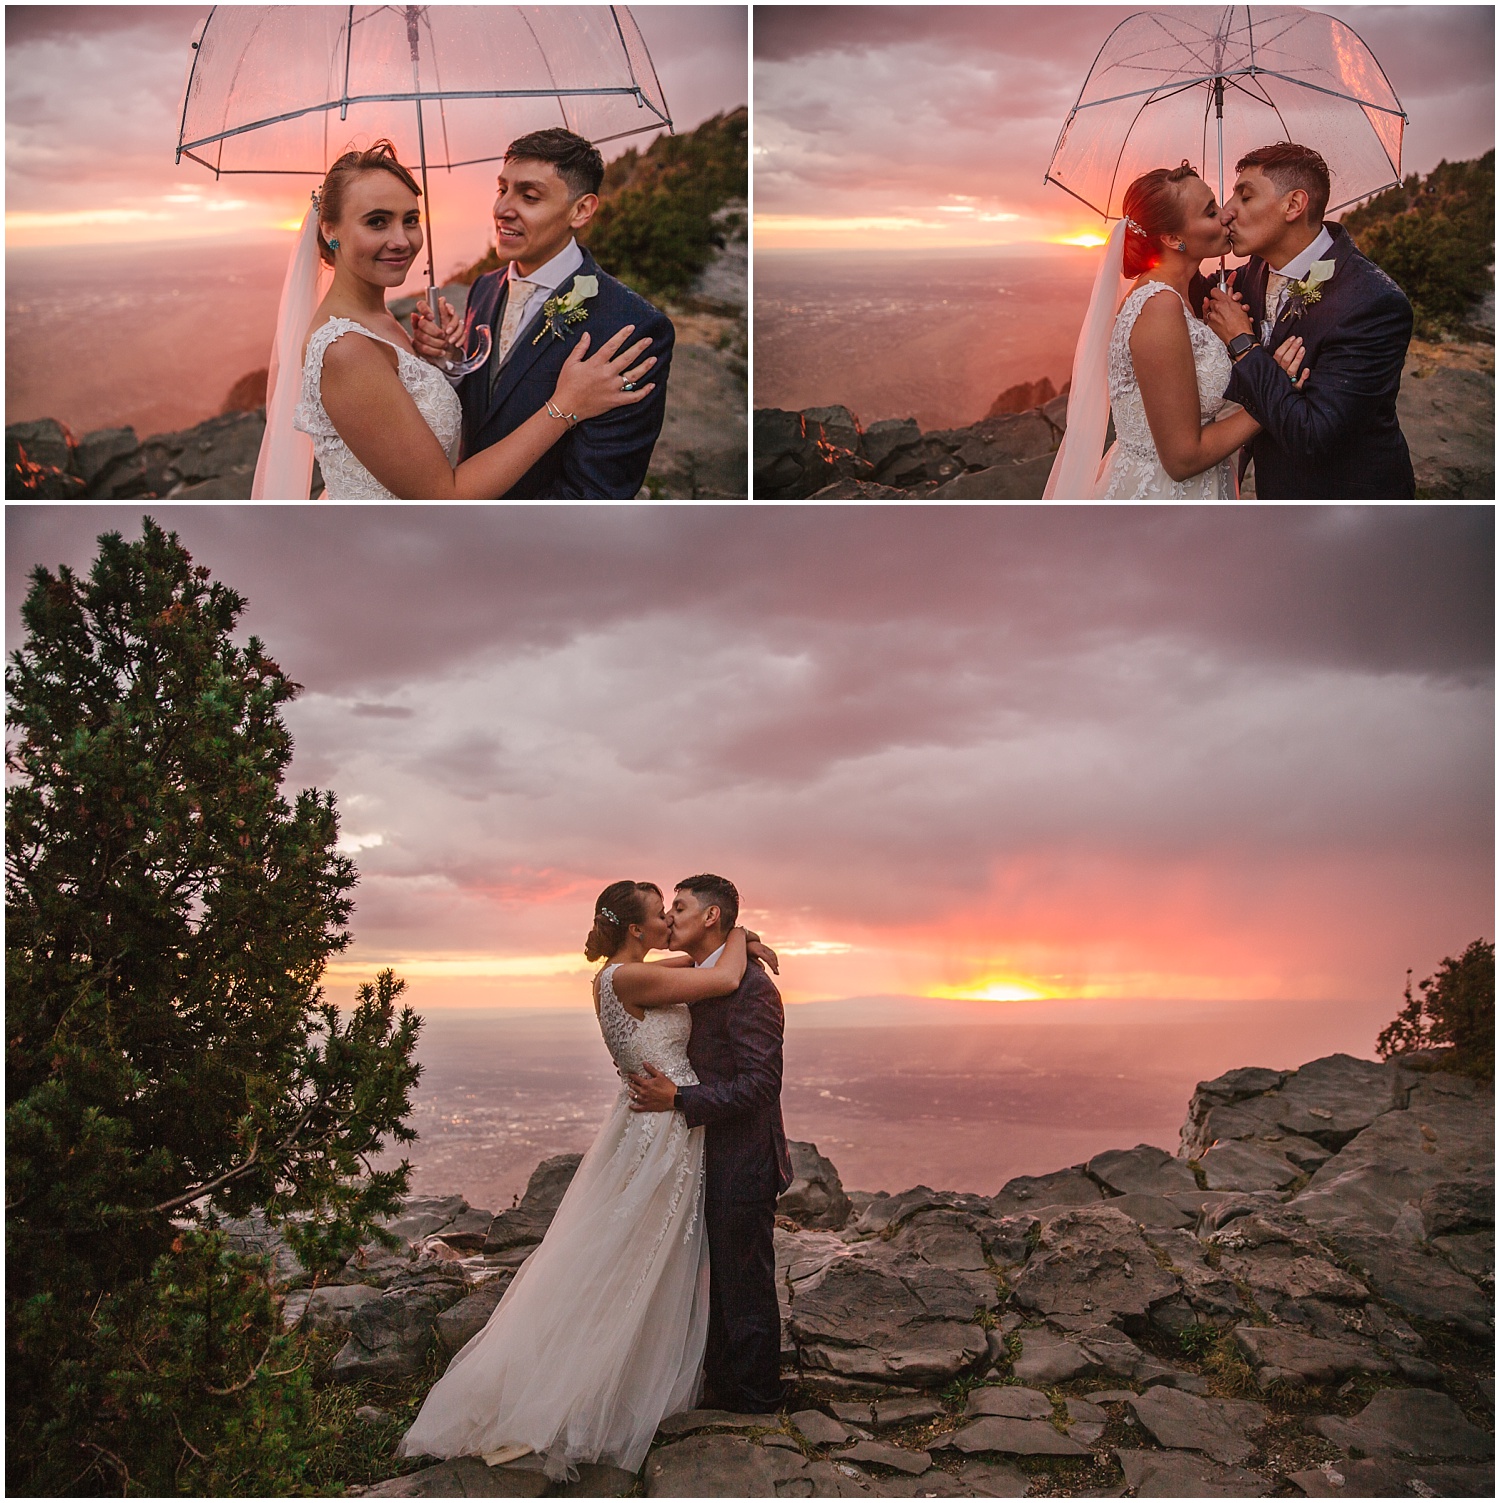 Sunset portraits of the bride and groom for Albuquerque elopement at Sandia Crest